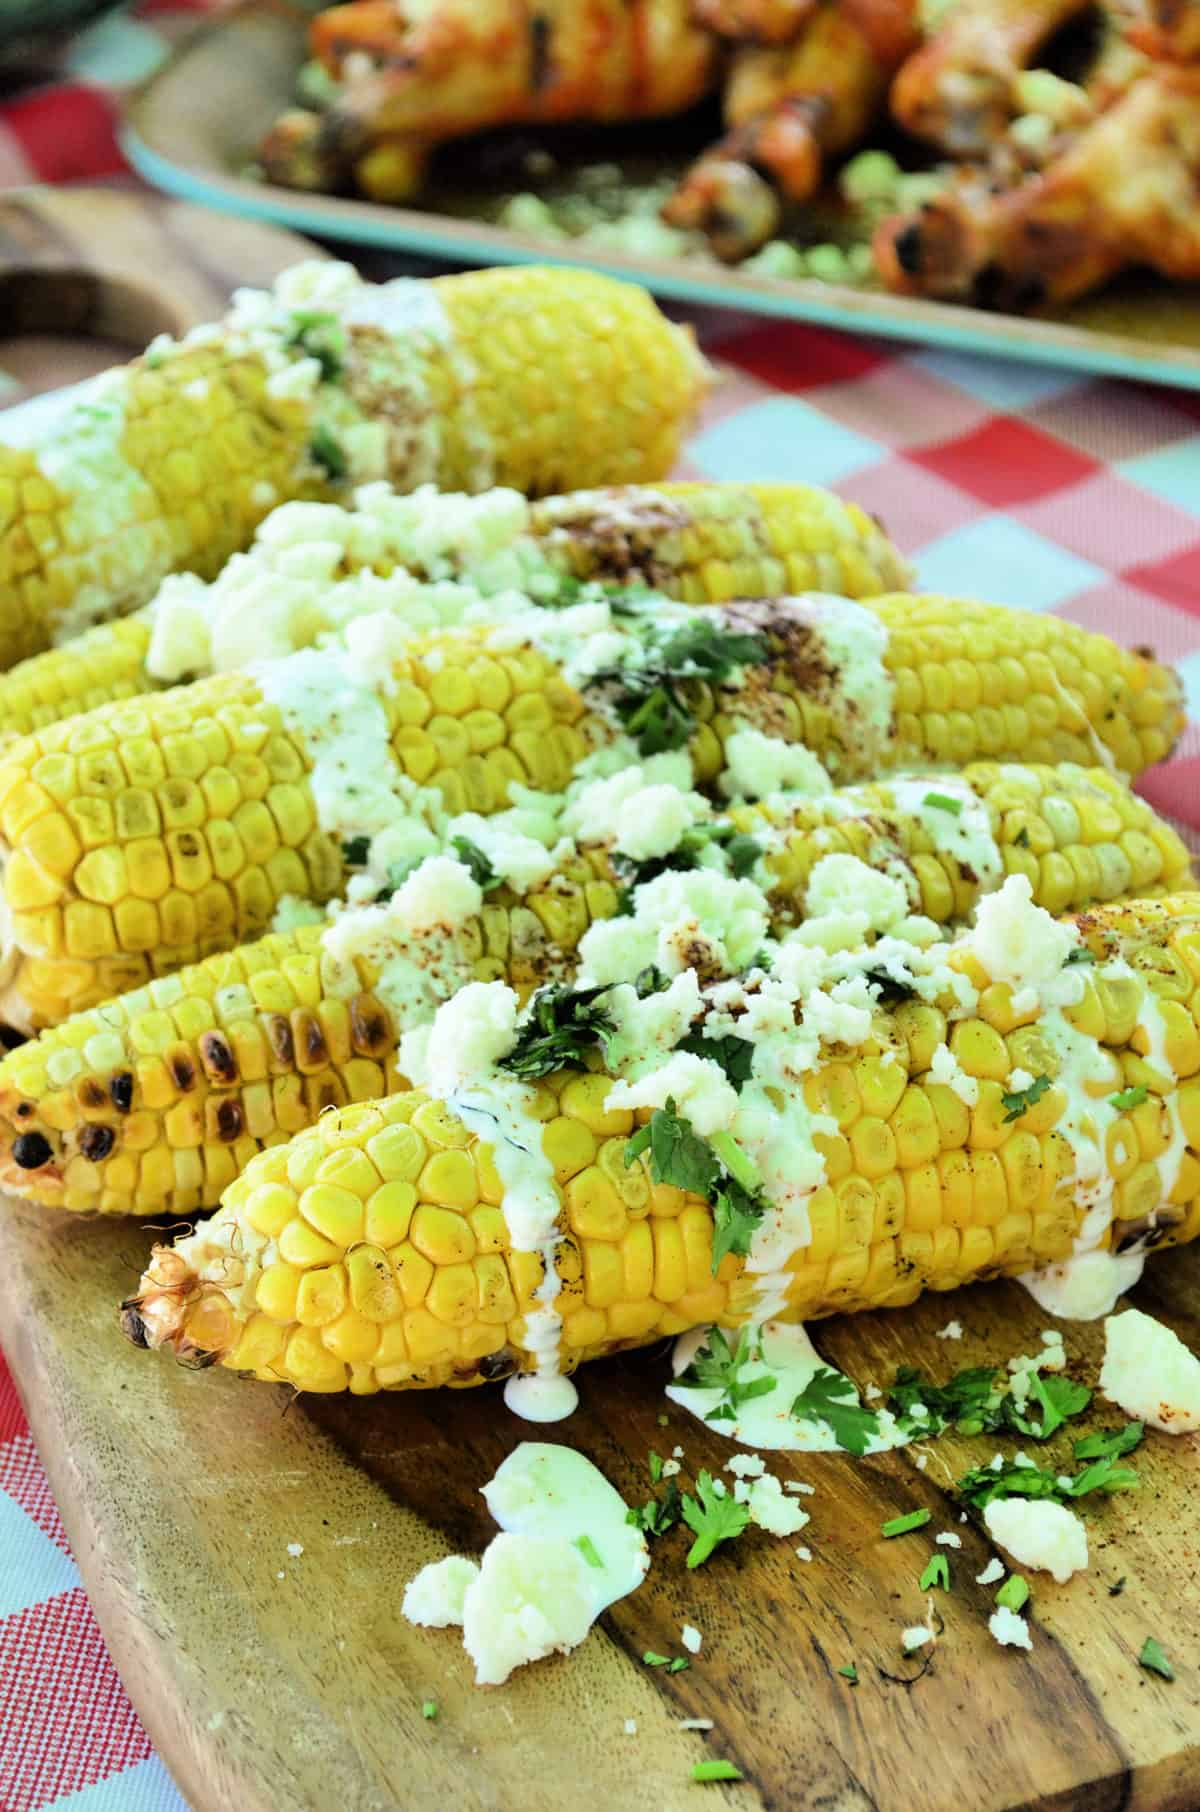 5 cobs of corn drizzled in white sauce, red powder, cheese crumbles, and green herbs.